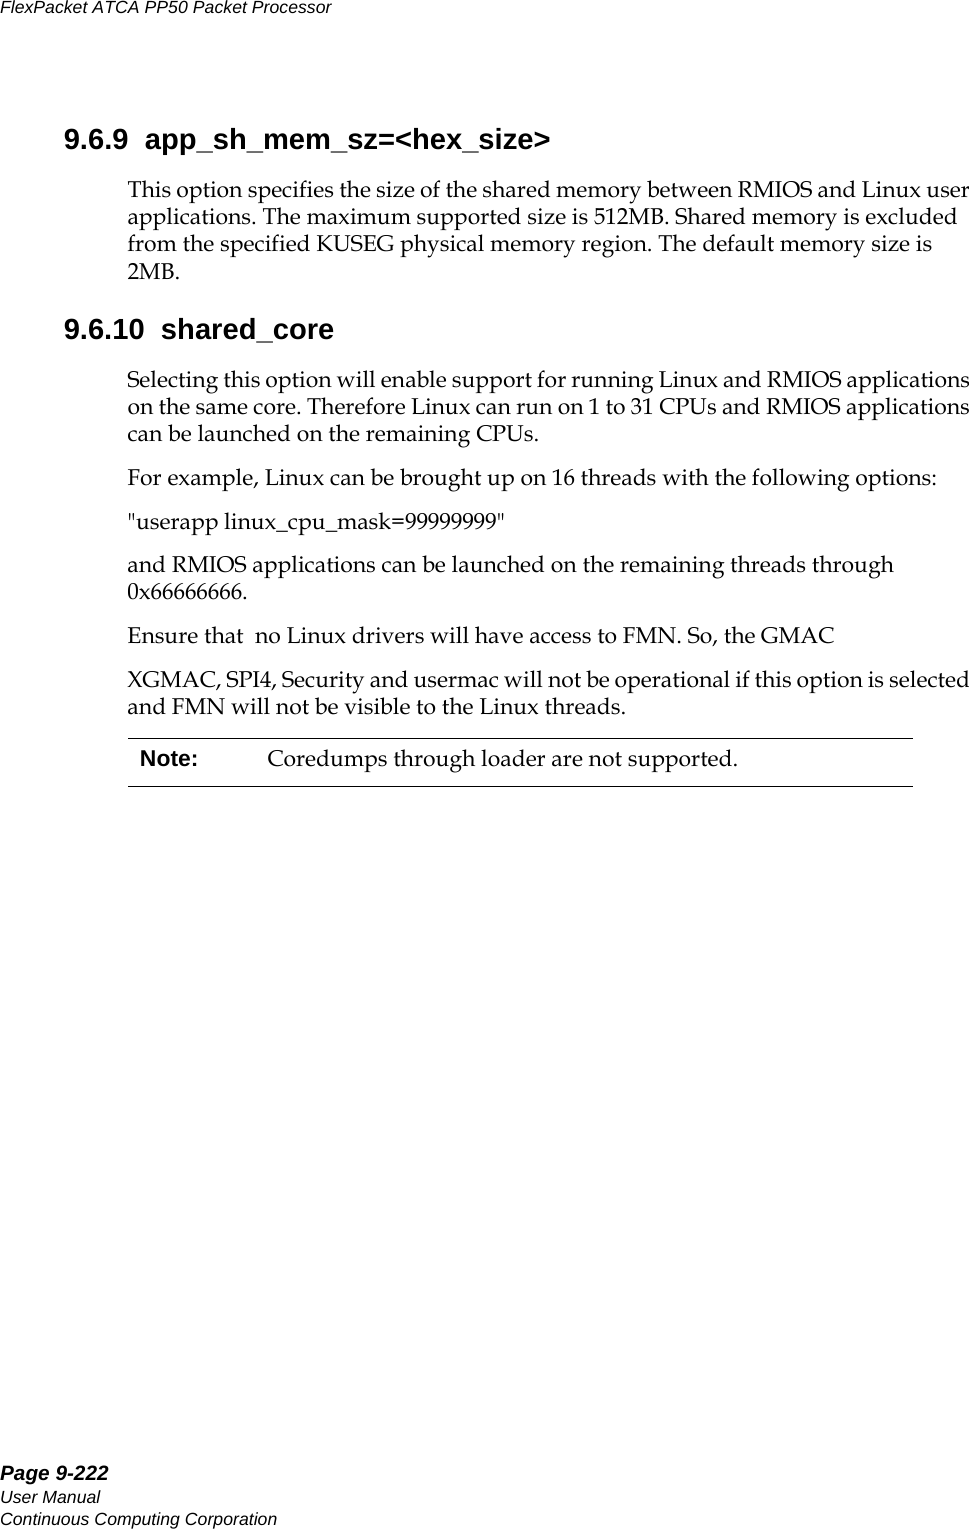 Page 9-222User ManualContinuous Computing CorporationFlexPacket ATCA PP50 Packet Processor     Preliminary9.6.9  app_sh_mem_sz=&lt;hex_size&gt;This option specifies the size of the shared memory between RMIOS and Linux user applications. The maximum supported size is 512MB. Shared memory is excluded from the specified KUSEG physical memory region. The default memory size is 2MB.9.6.10  shared_coreSelecting this option will enable support for running Linux and RMIOS applications on the same core. Therefore Linux can run on 1 to 31 CPUs and RMIOS applications can be launched on the remaining CPUs.For example, Linux can be brought up on 16 threads with the following options: &quot;userapp linux_cpu_mask=99999999&quot; and RMIOS applications can be launched on the remaining threads through 0x66666666.Ensure that  no Linux drivers will have access to FMN. So, the GMACXGMAC, SPI4, Security and usermac will not be operational if this option is selected and FMN will not be visible to the Linux threads.Note: Coredumps through loader are not supported.